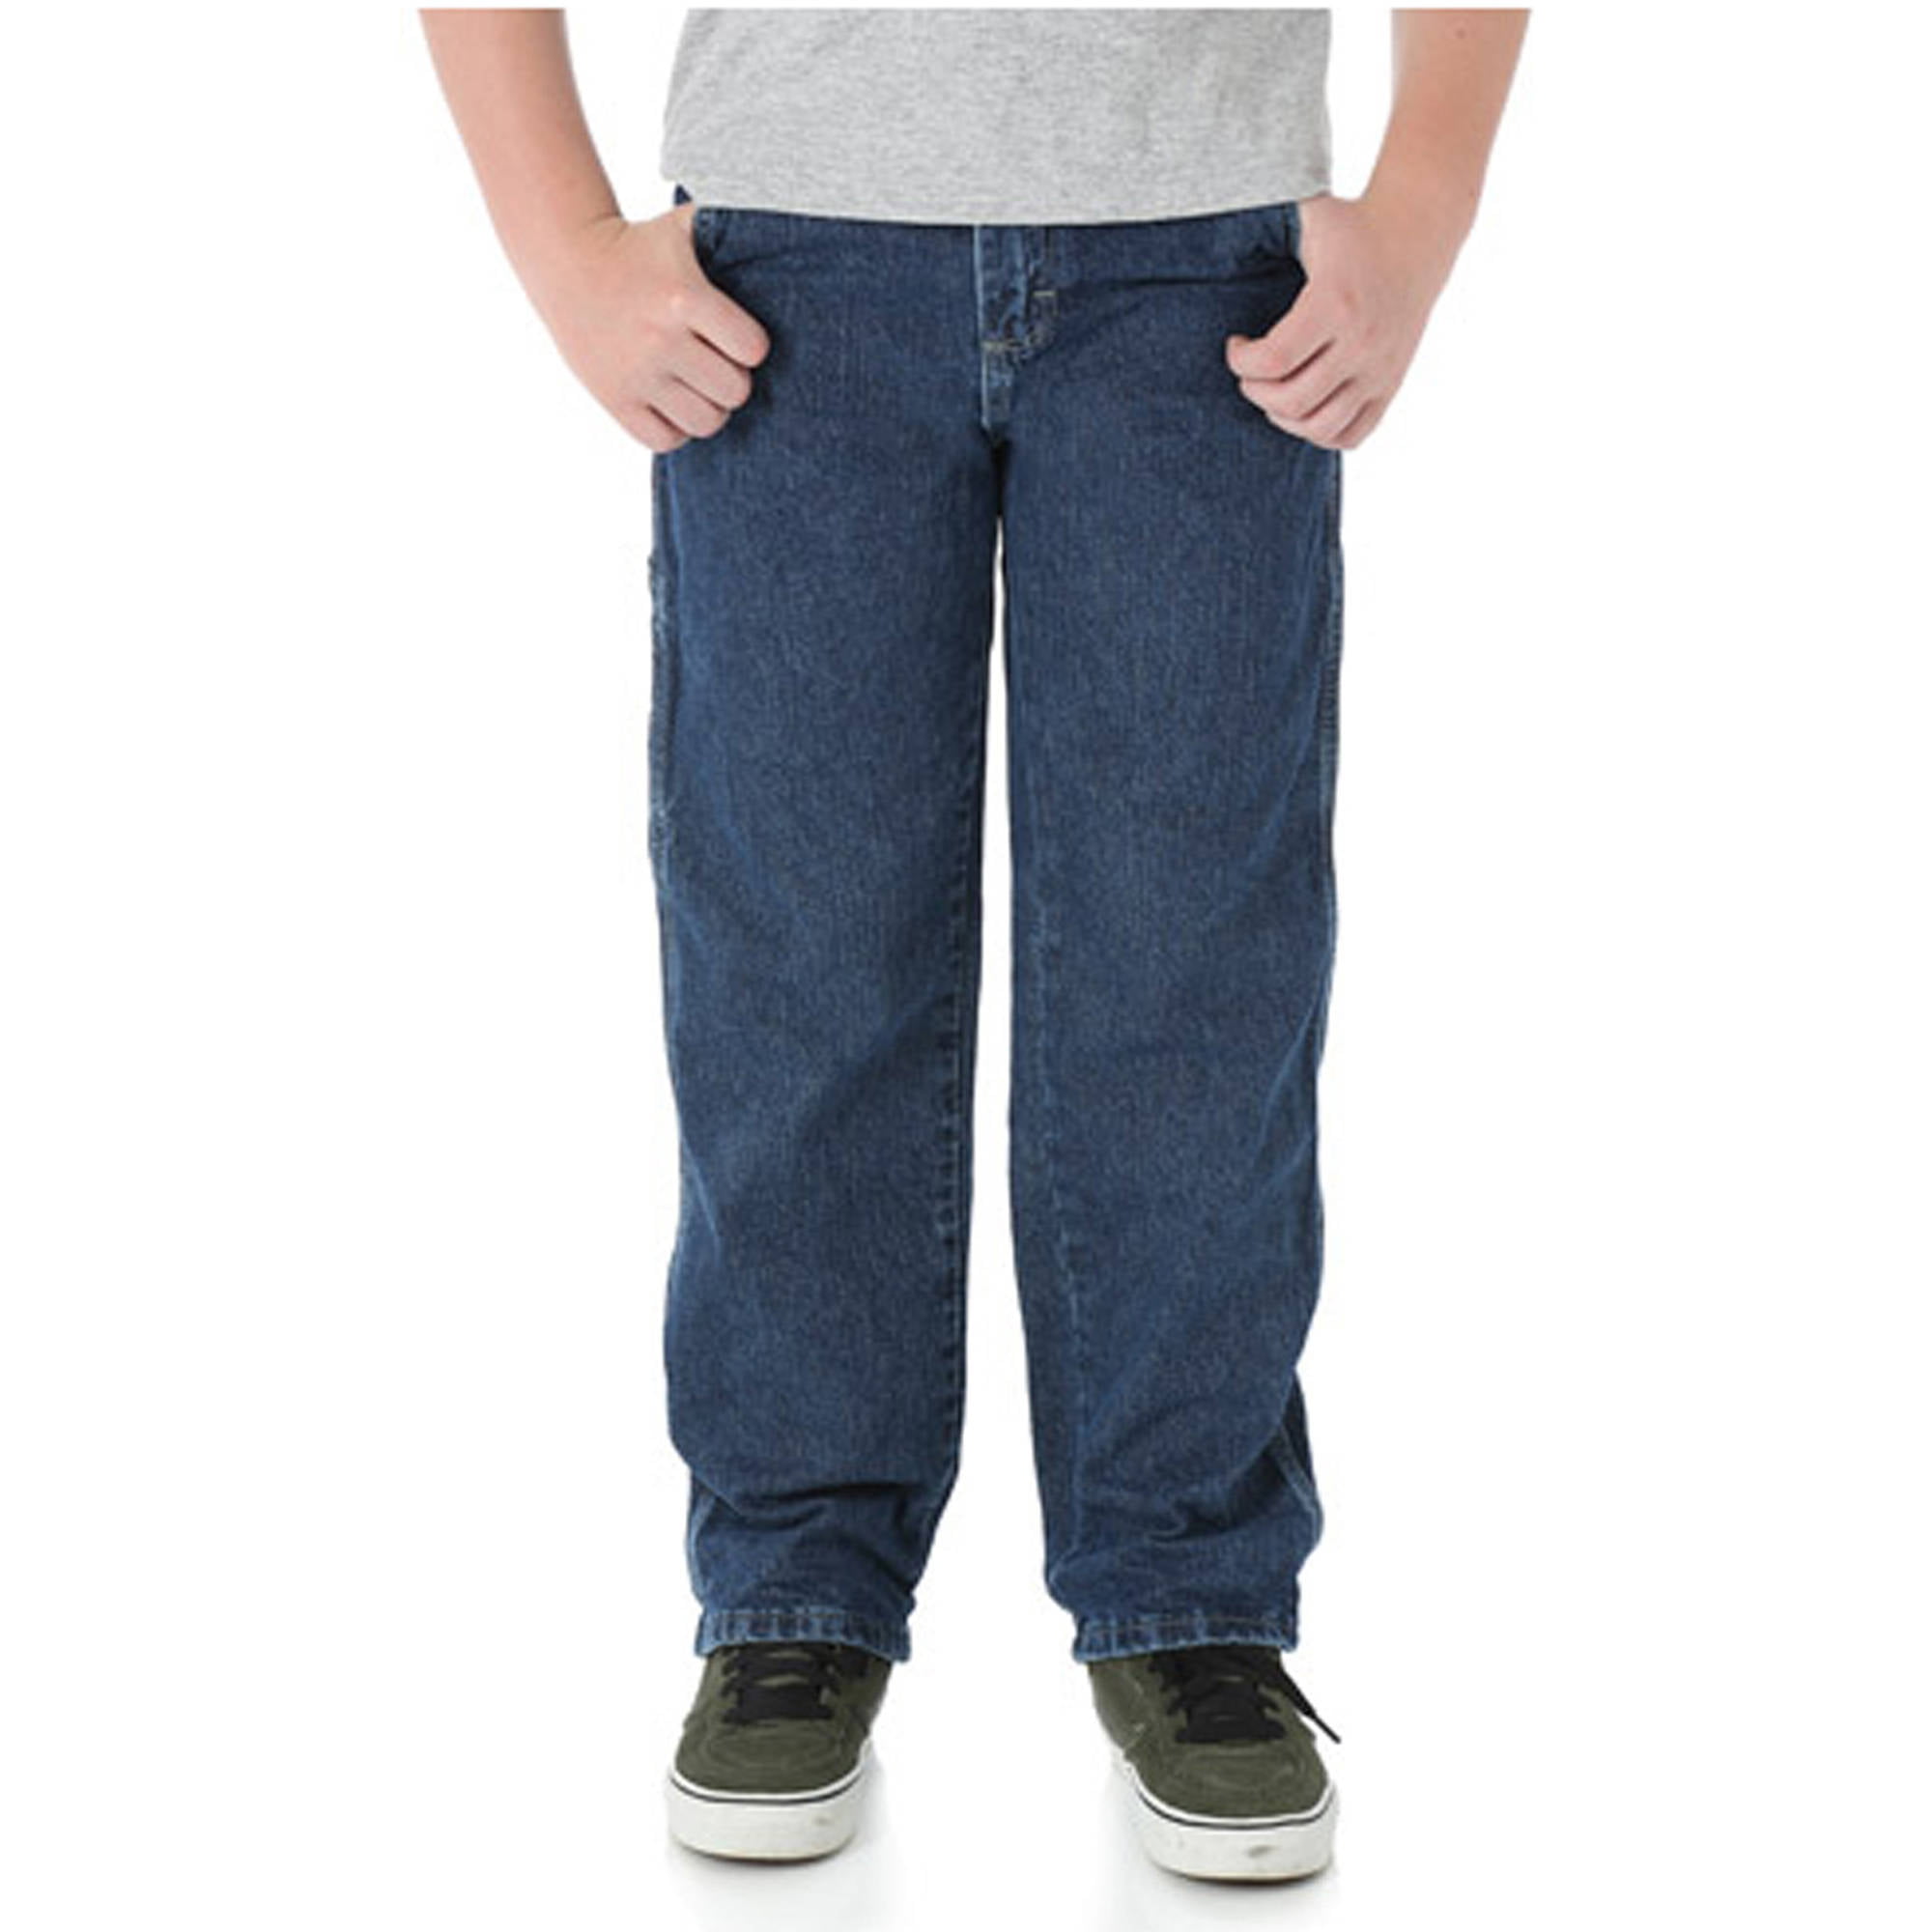 Rustler Boys Relaxed Slim Jeans Mid Shade Size 12 Slim  NEW